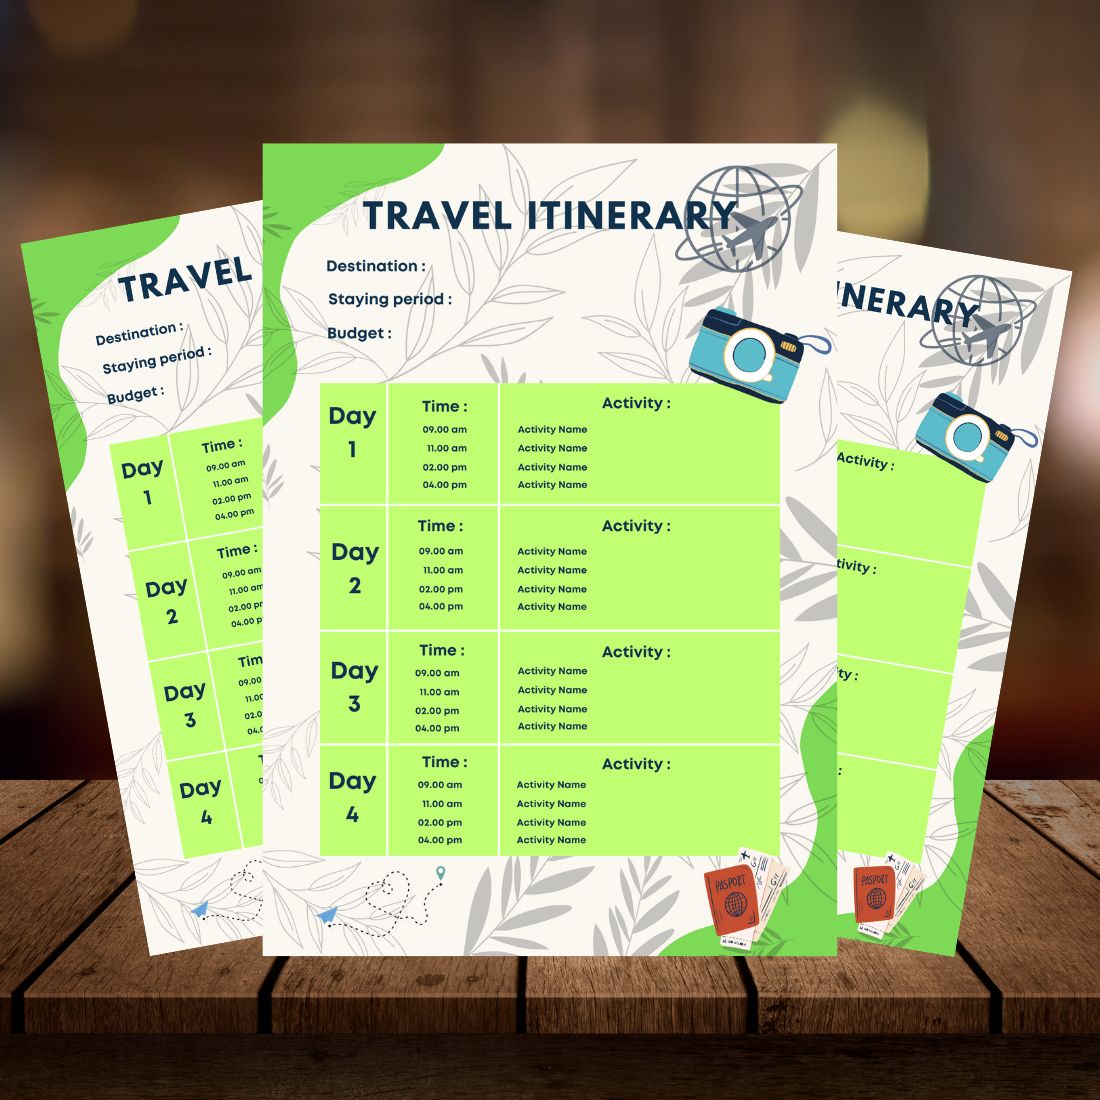 Travel Itinerary green cover image.